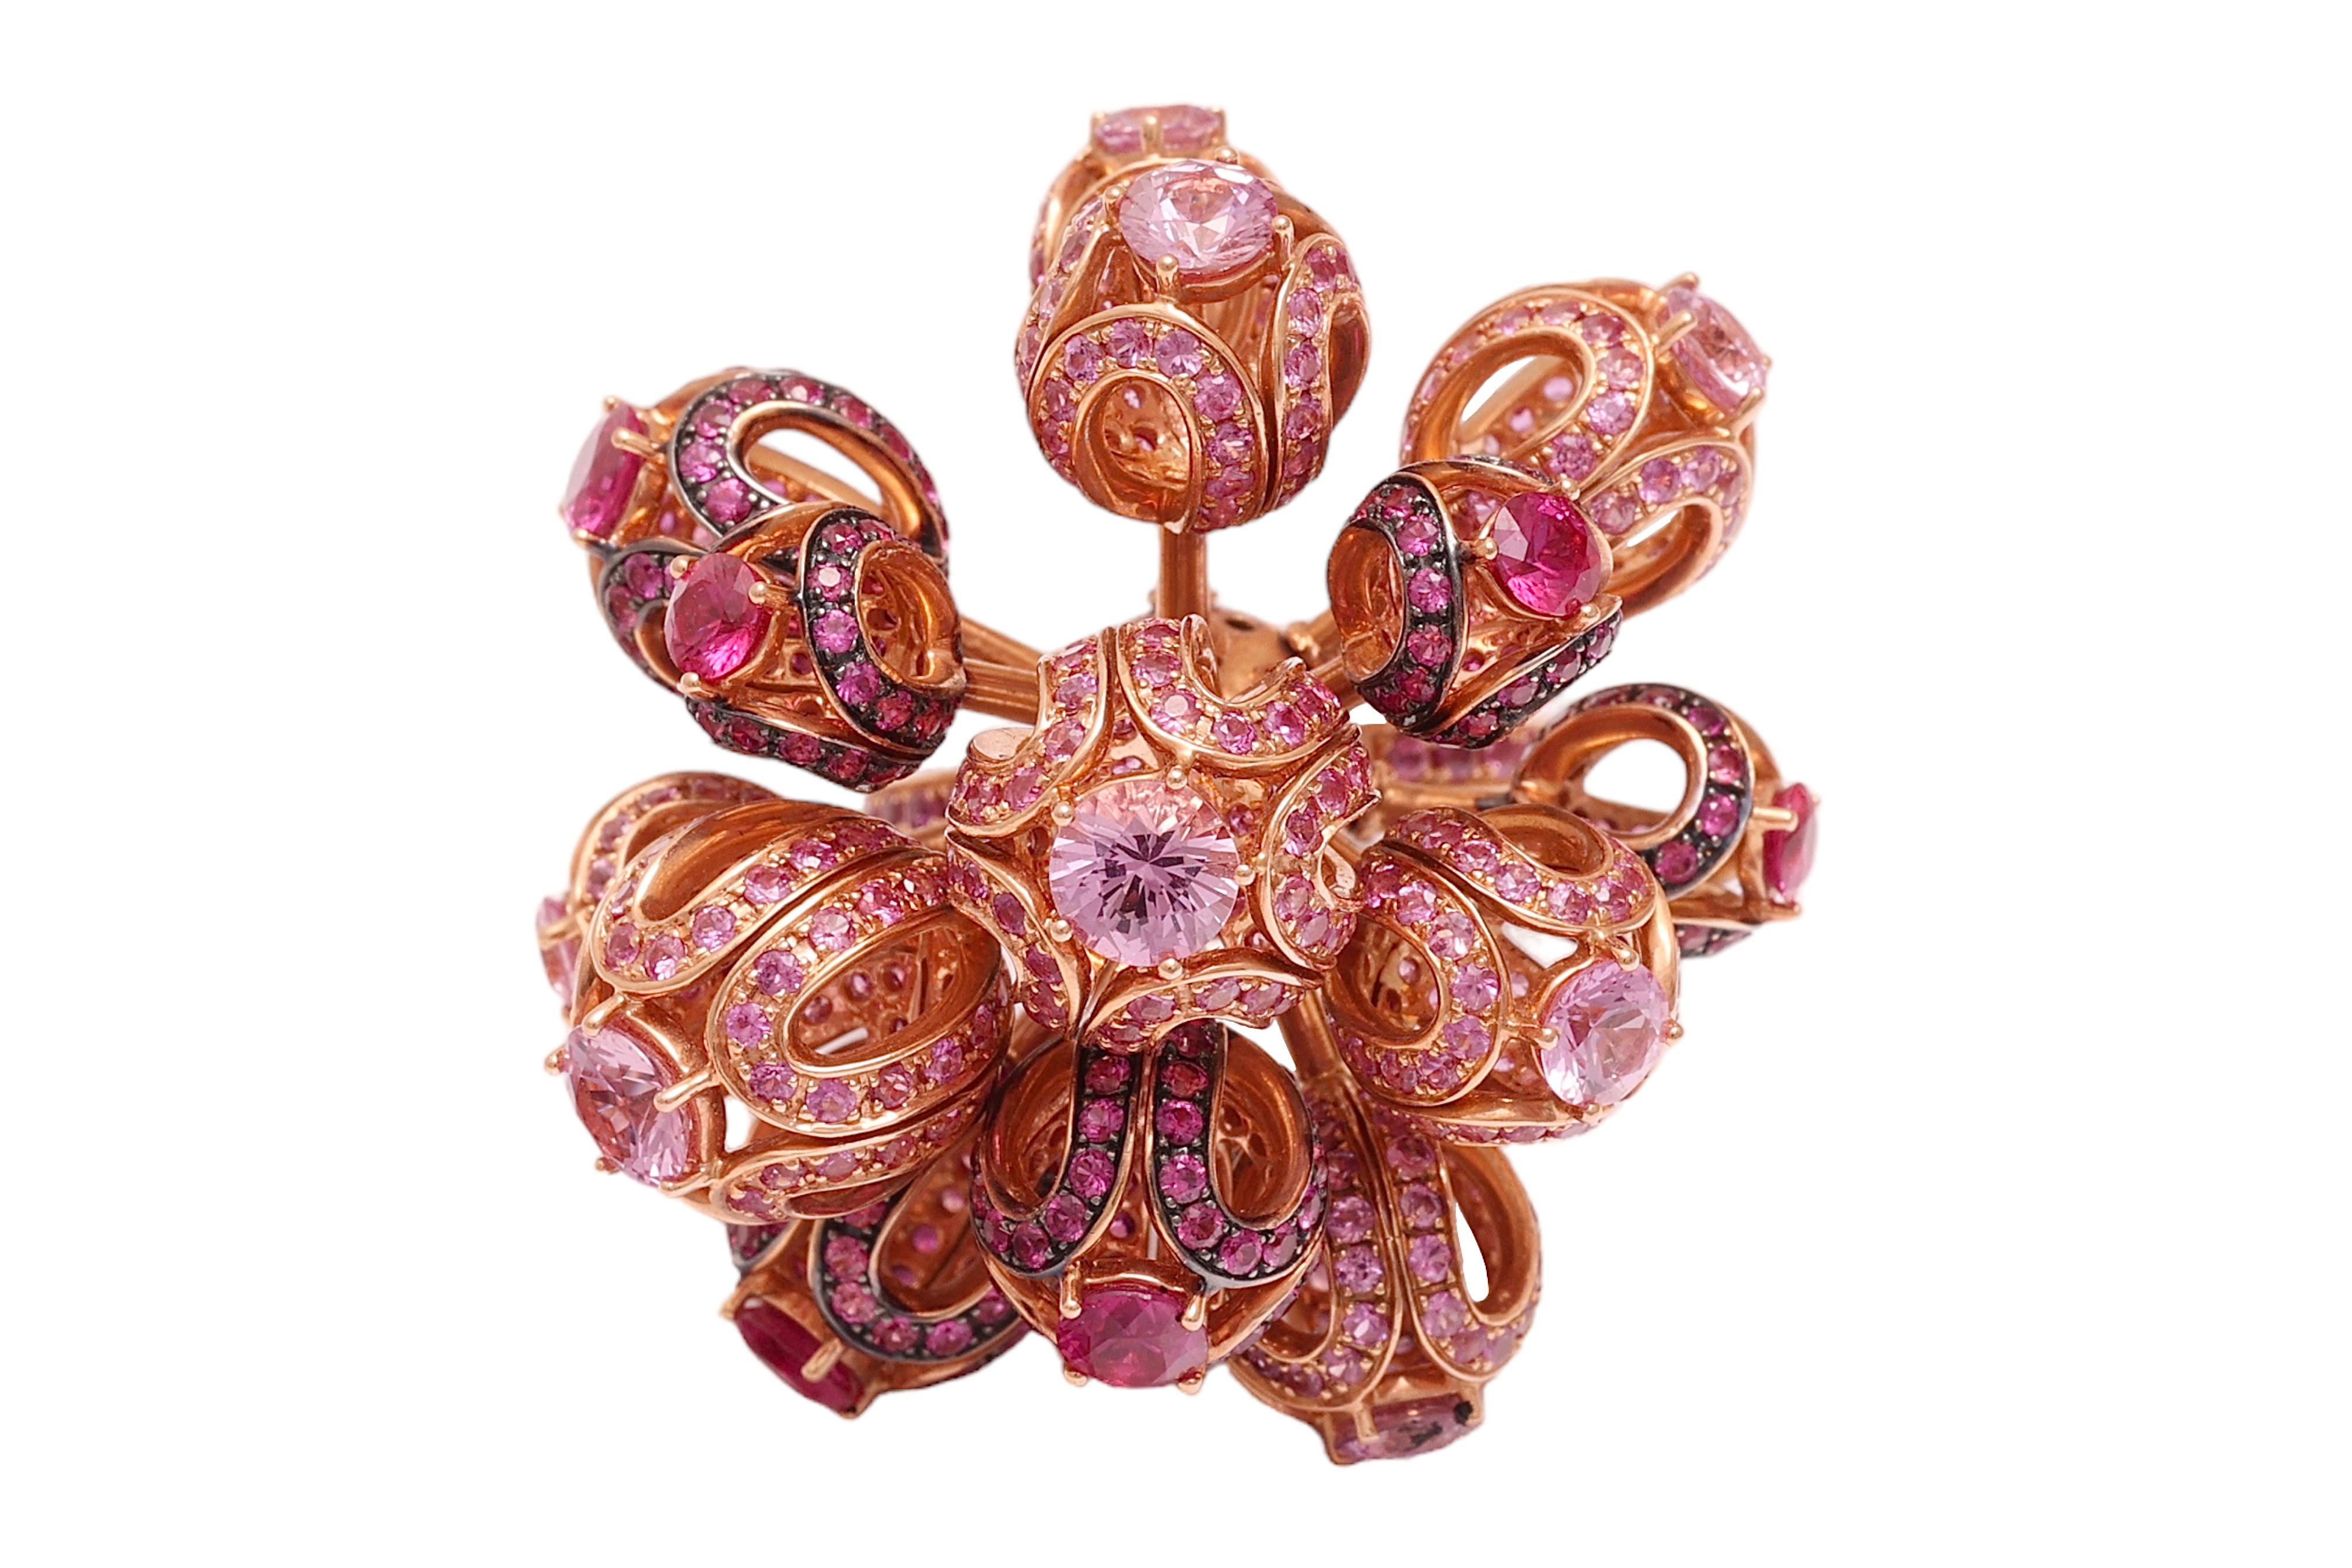 Very Rare and Beautiful 18kt Yellow Gold Moving Flower Ring Set with 15.65 ct Pink Sapphires

Sapphires: Hot pink and pink sapphires together approx. 15.65ct 

Material: 18kt Yellow gold

Ring size: 54 EU / 7 US ( can be resized for free)

Total